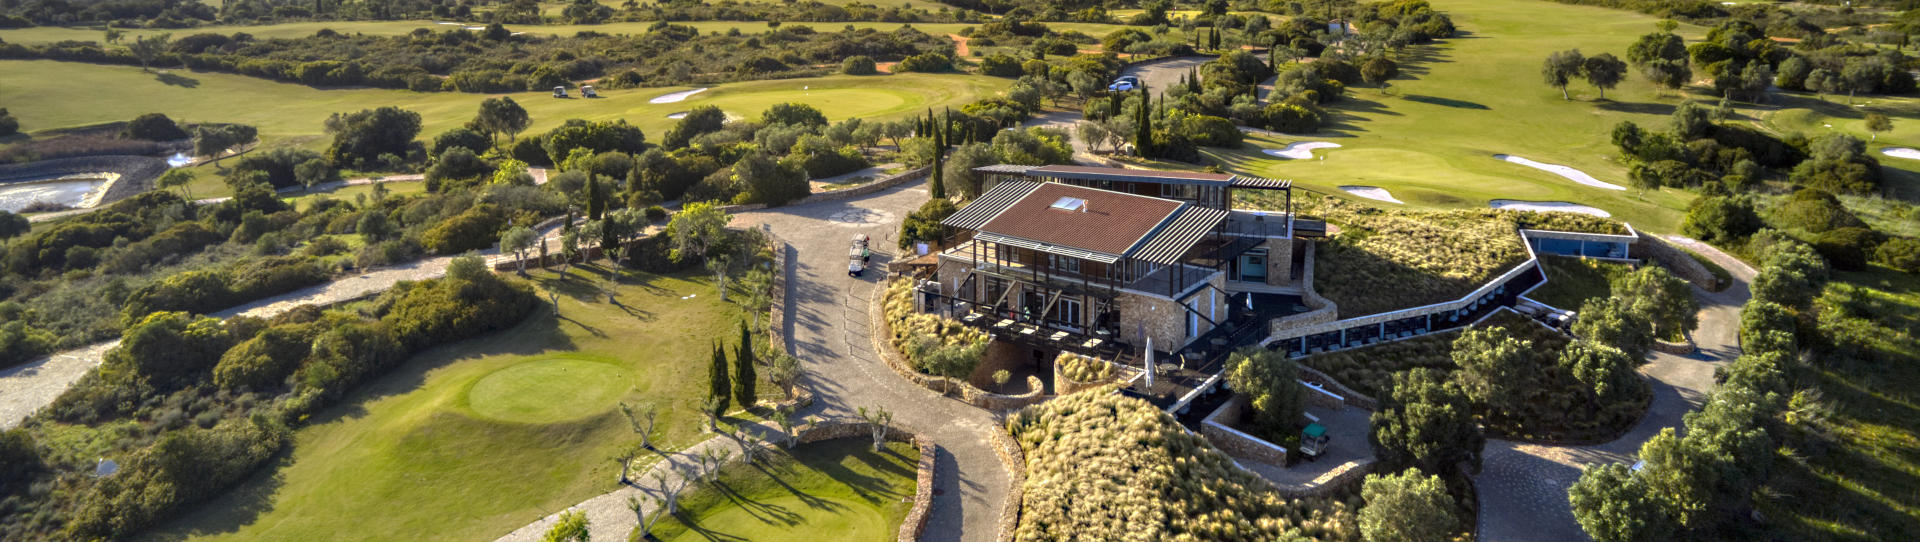 Portugal golf holidays - Espiche Weekly Pass - Photo 2